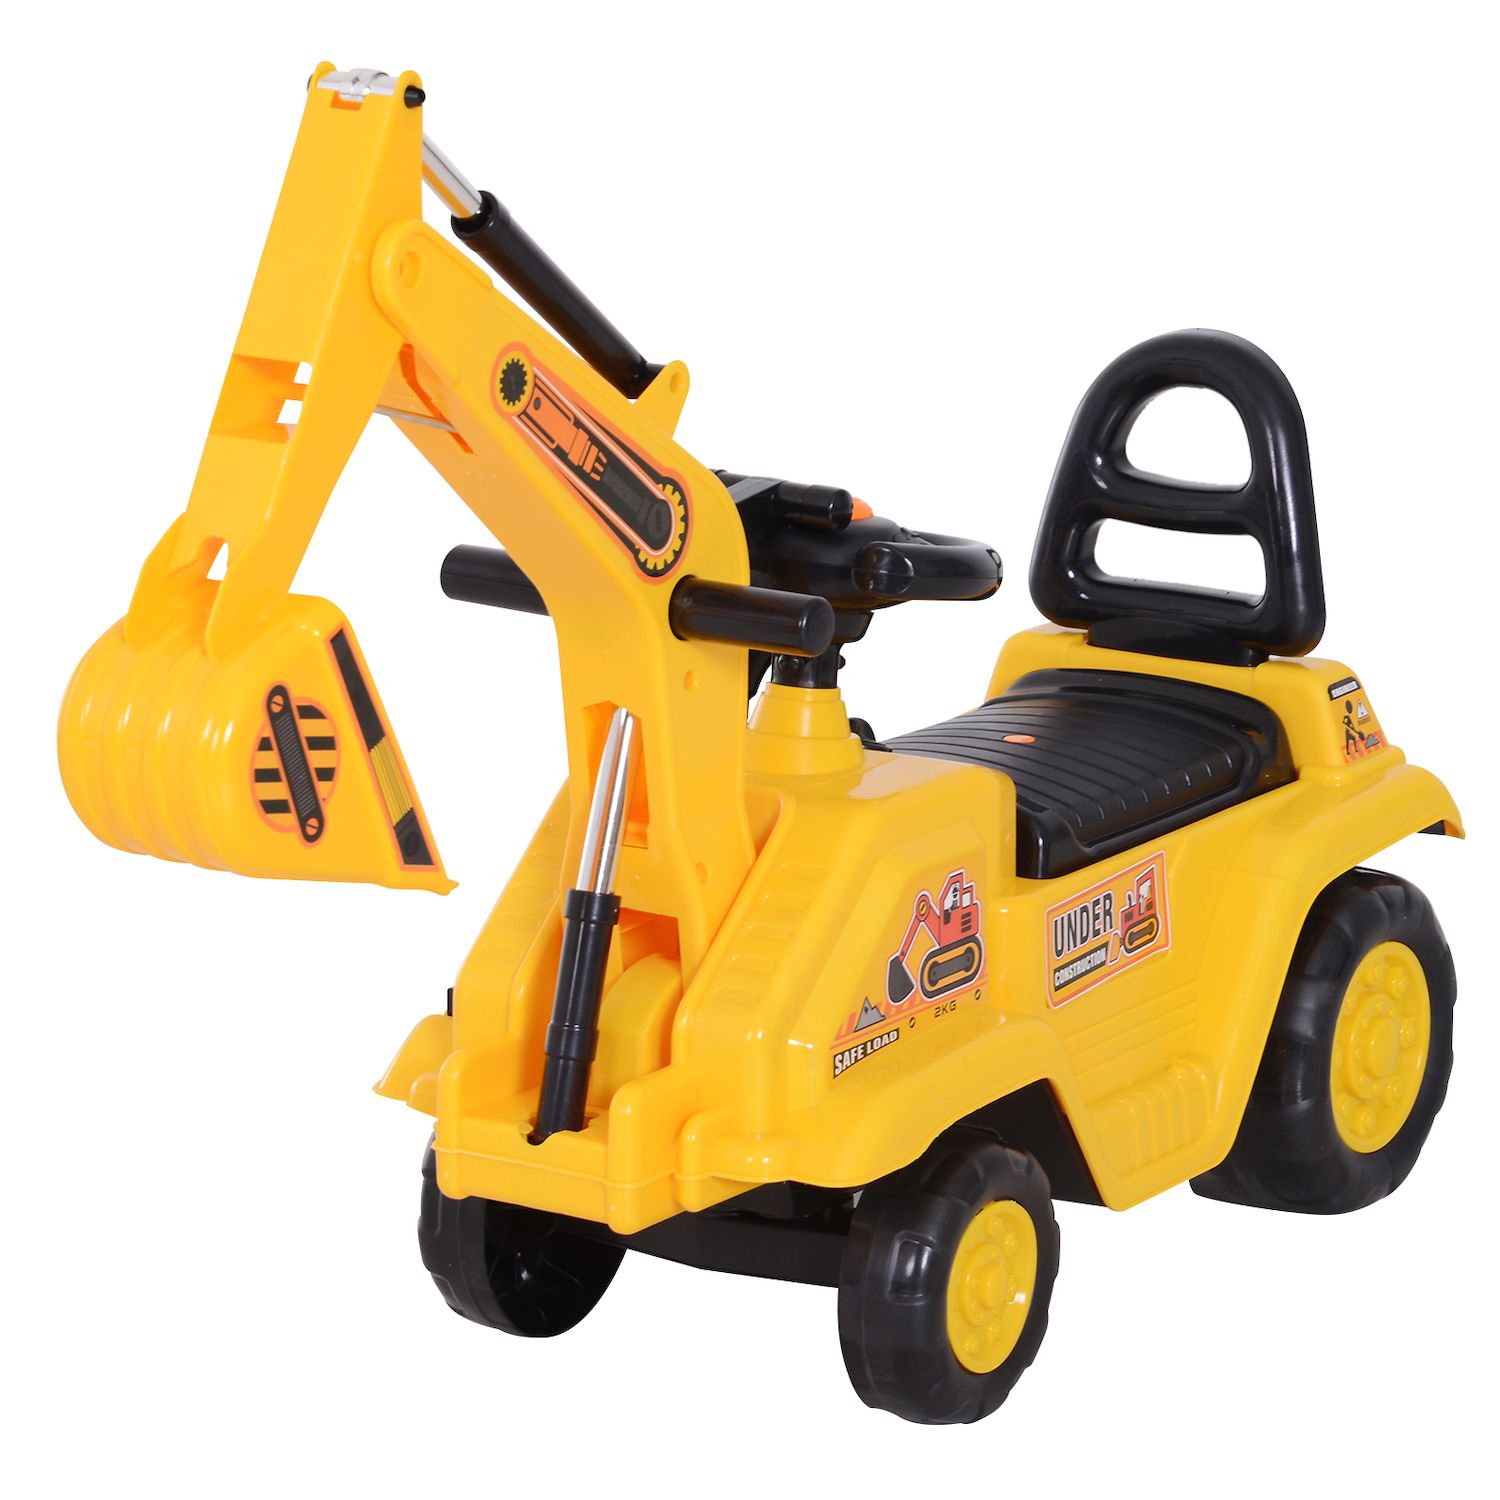 Qaba No Power Construction Ride On Toy Construction Truck, Multi-functional  Excavator Digger With Workable Digging Bucket, Yellow : Target